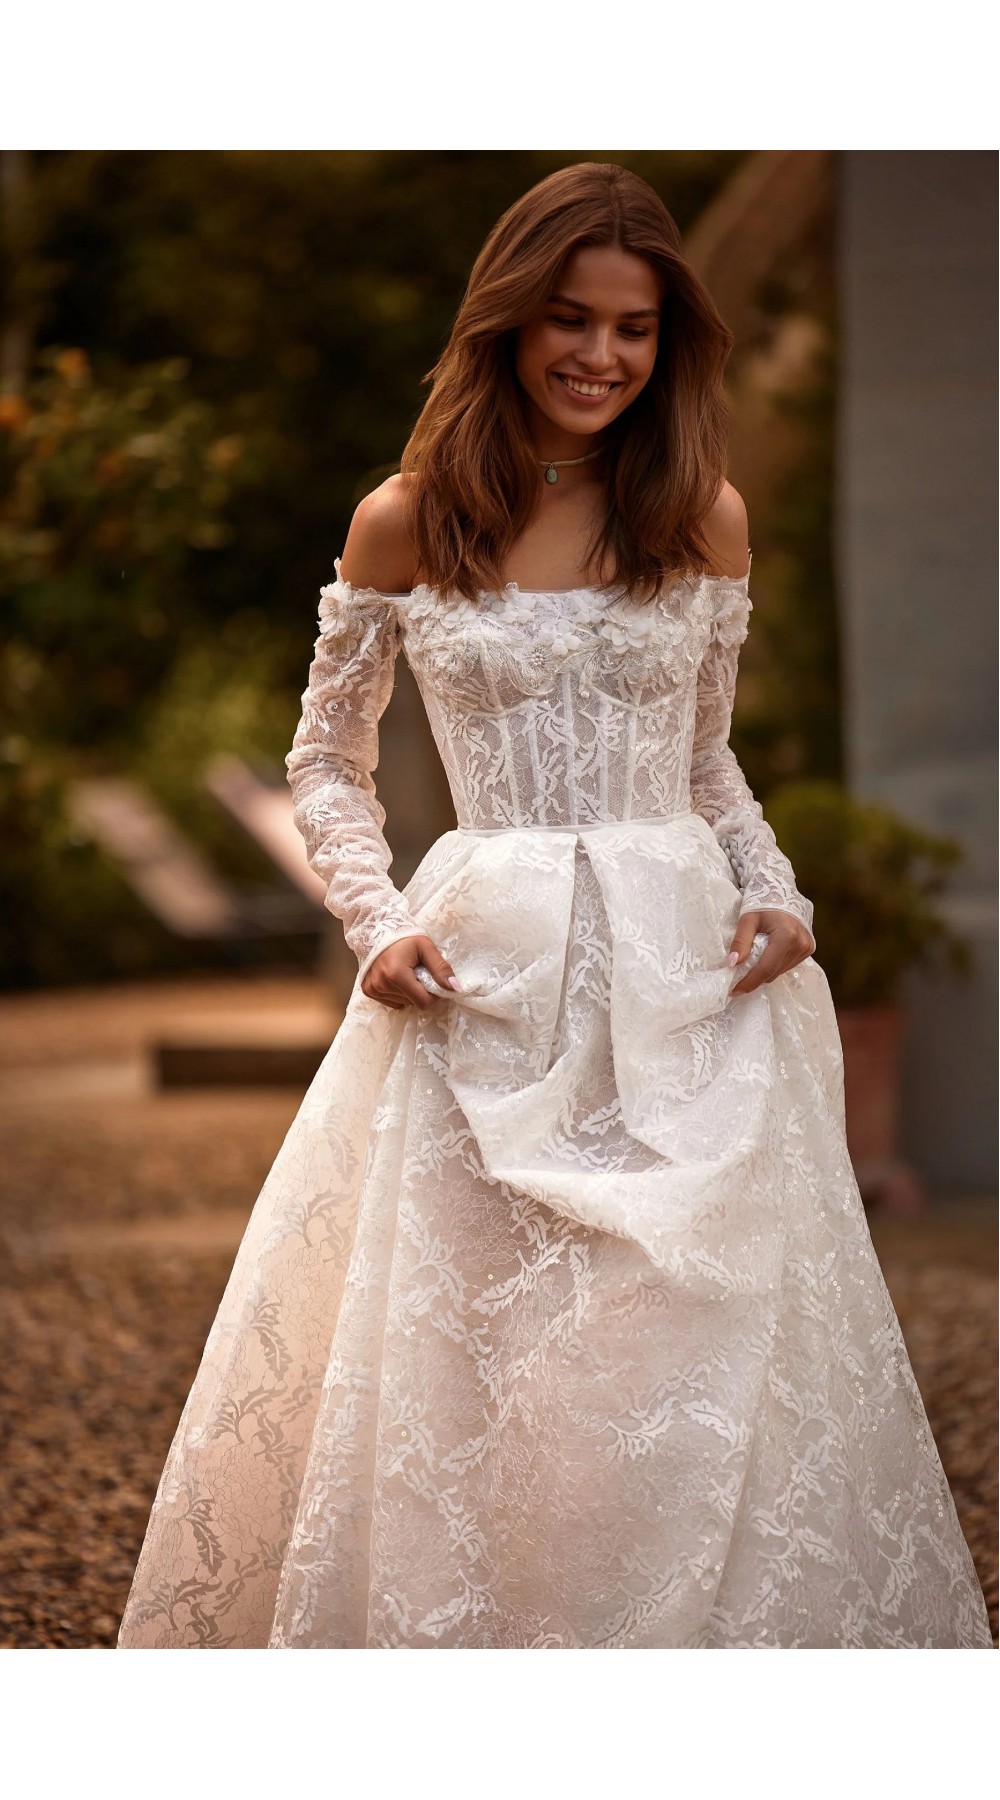 Luxury Wedding Dress - A-line 3D Flowers, Beading and Skirt with Lining - Foxglove - LDK-08293.42.17